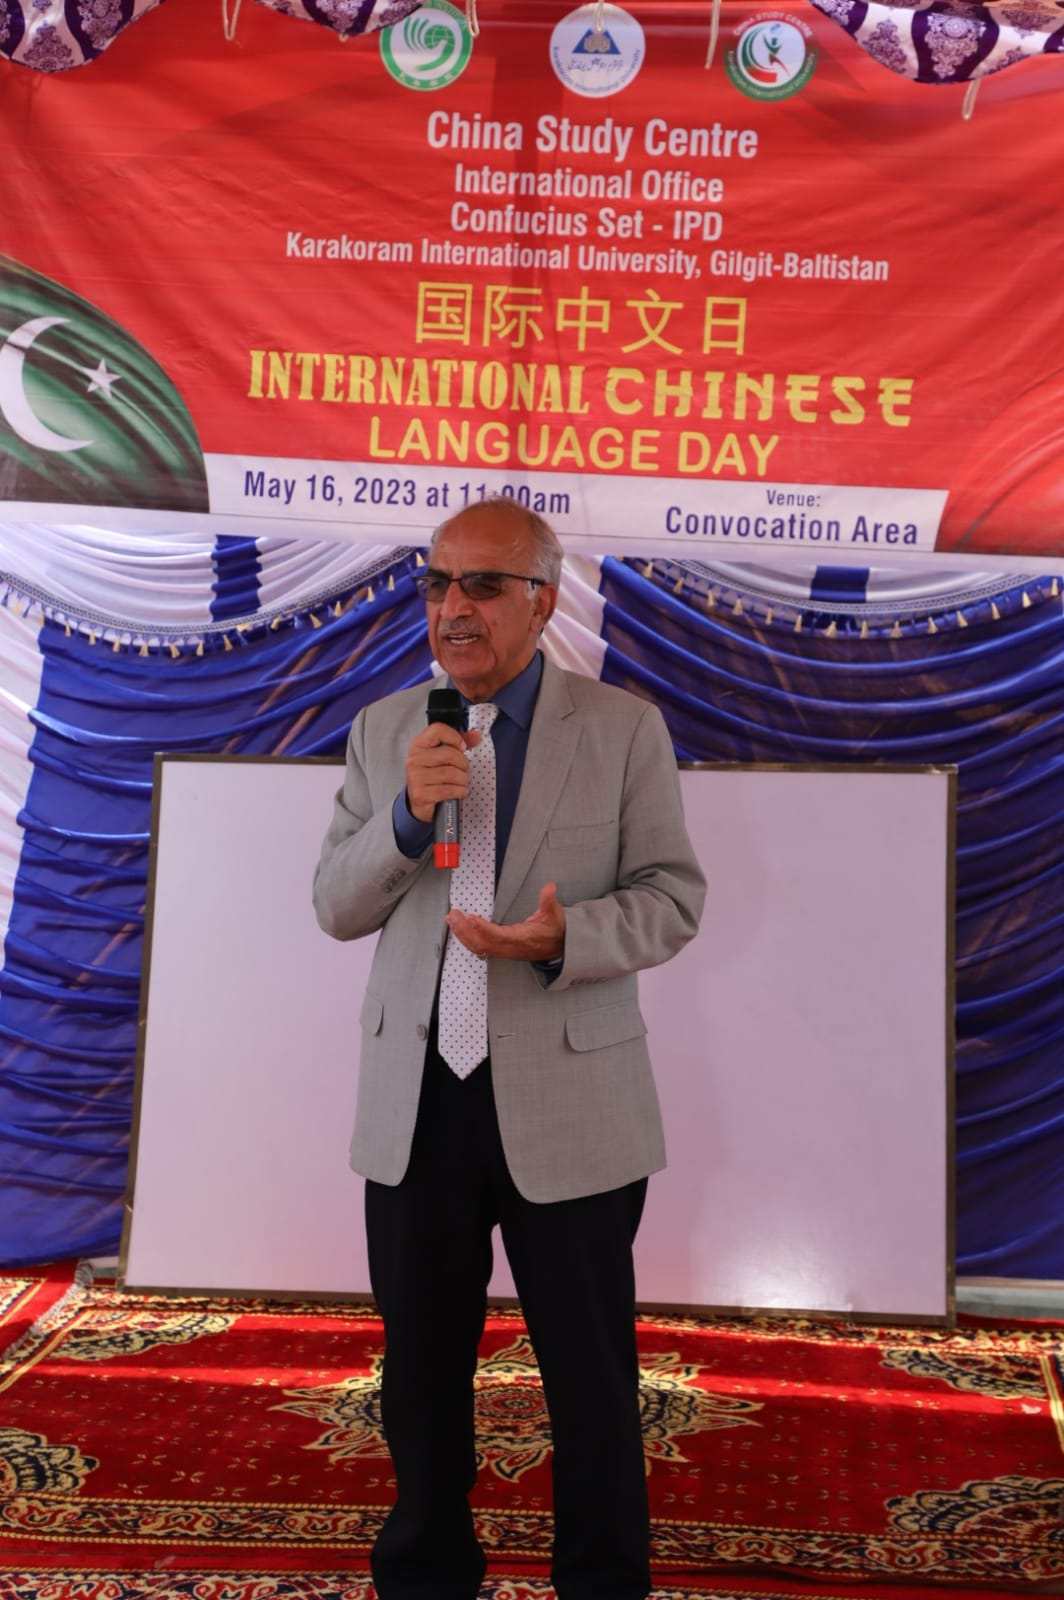 Chinese language and cooking competitions held at KIU